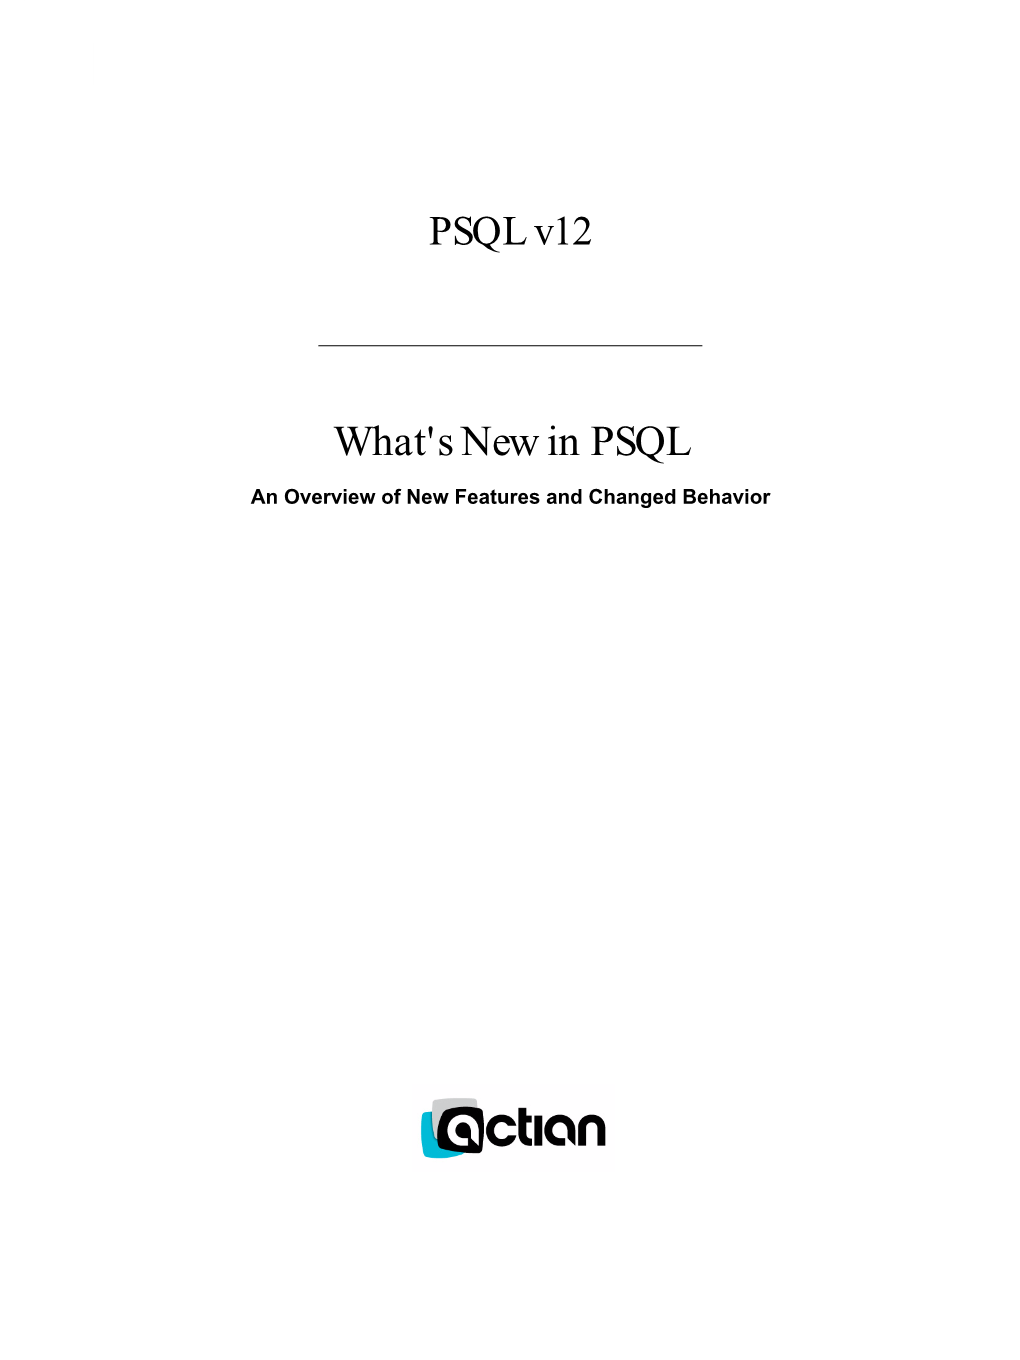 What's New in PSQL